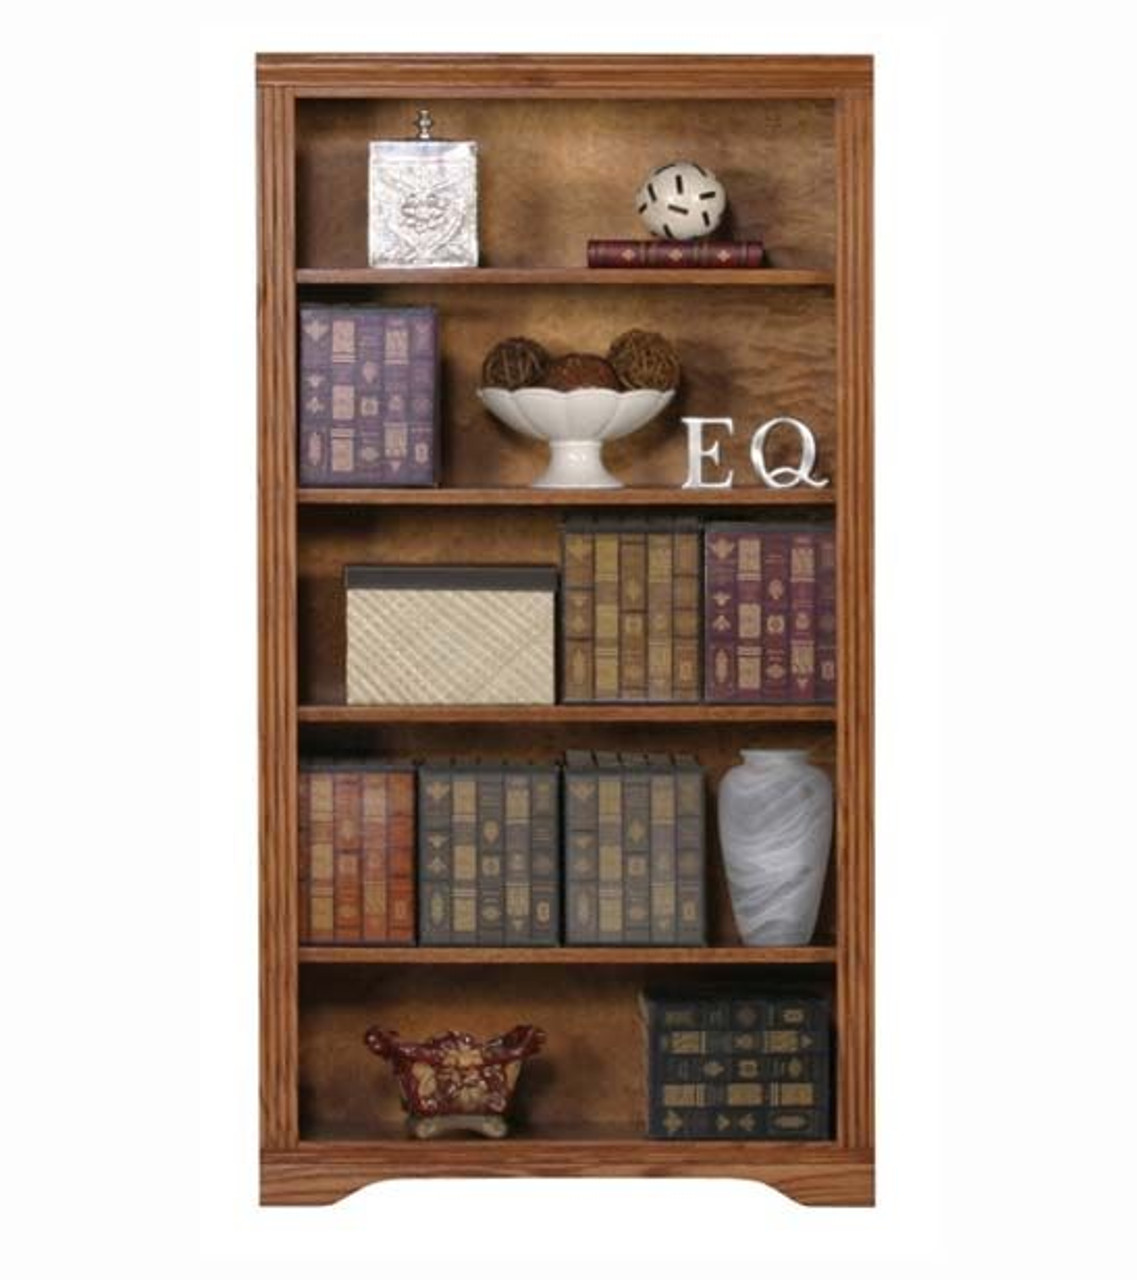 Eagle Industries 93360 32" x 60" Oak Bookcase Medium FInish Ridge Furniture Transitional Home Office Open Library Style Solid American Hardwood Bookcase with 4 Adjustable Shelves and Fluted Detail, Part # E-93360